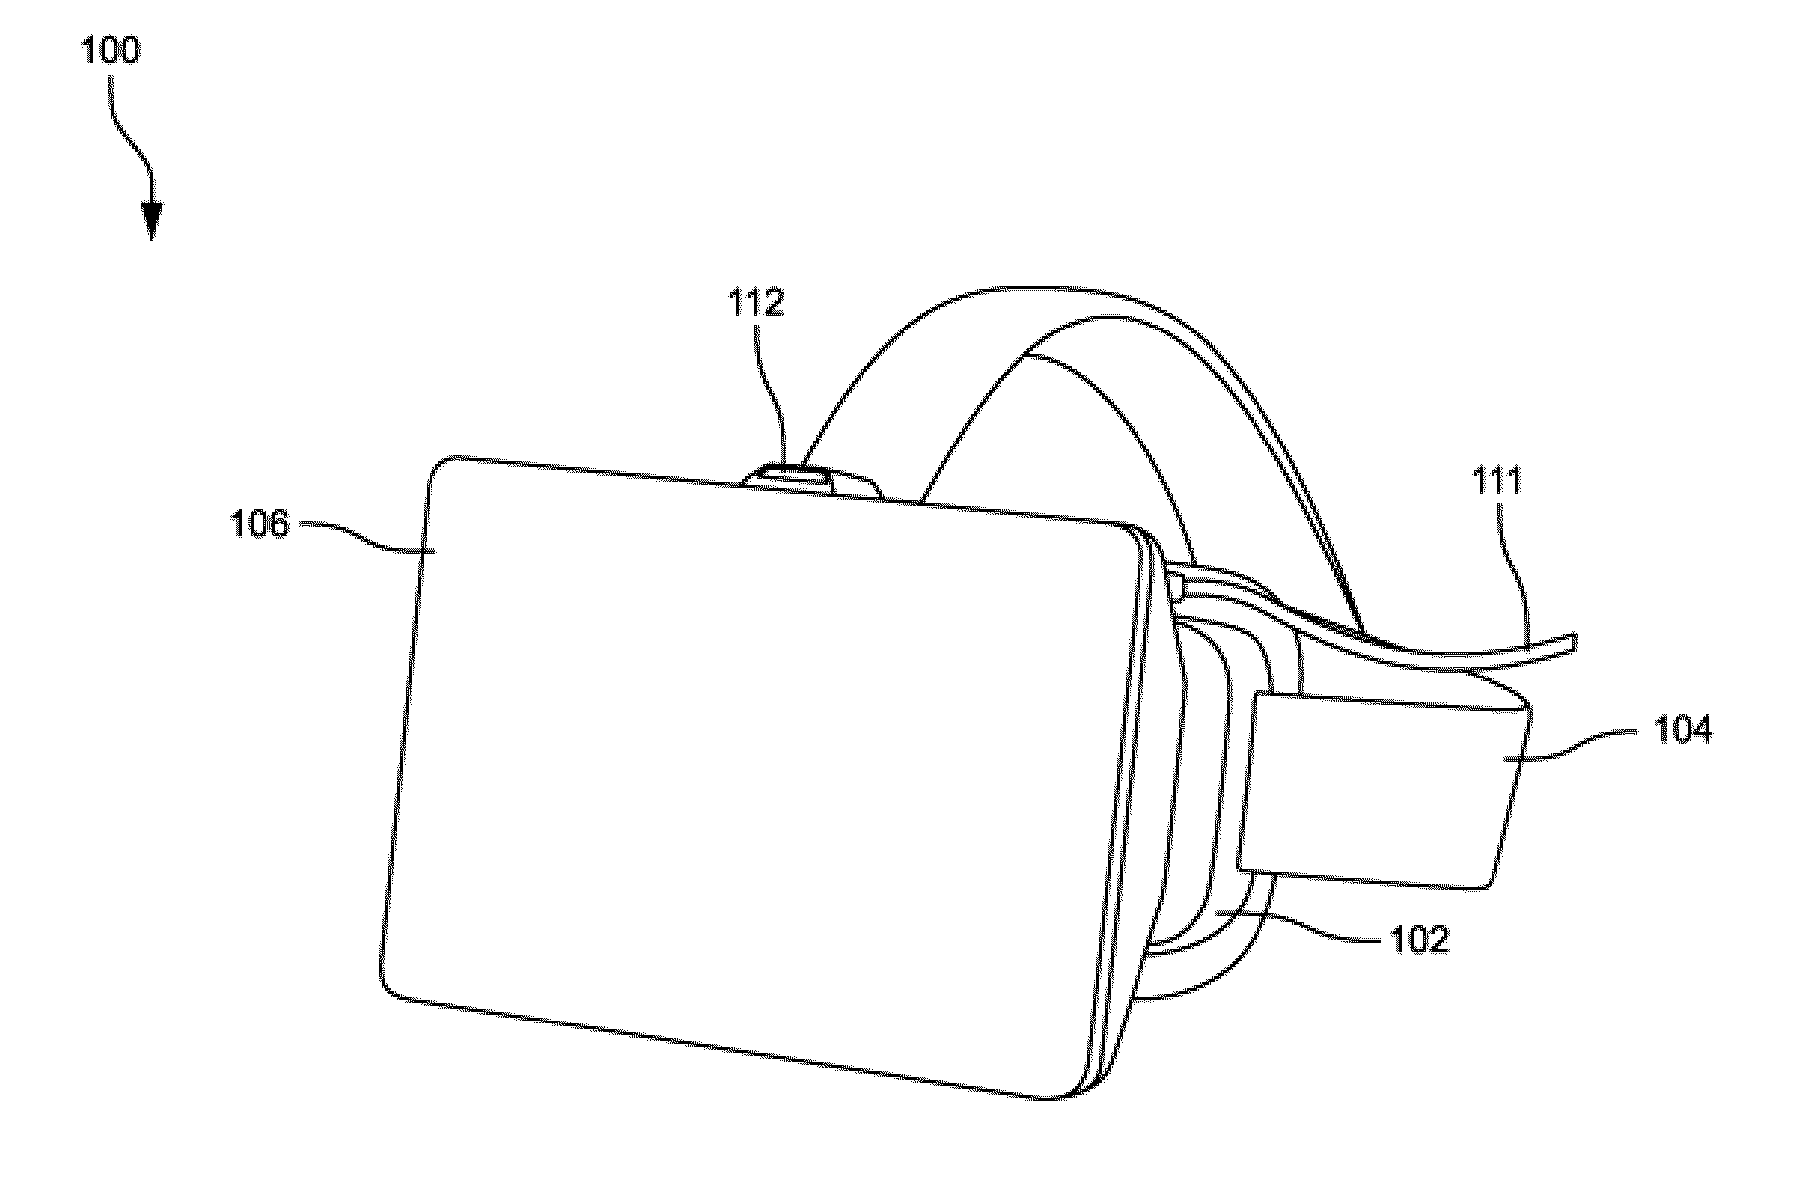 Head-mounted display device with air conditioning device and control approaches